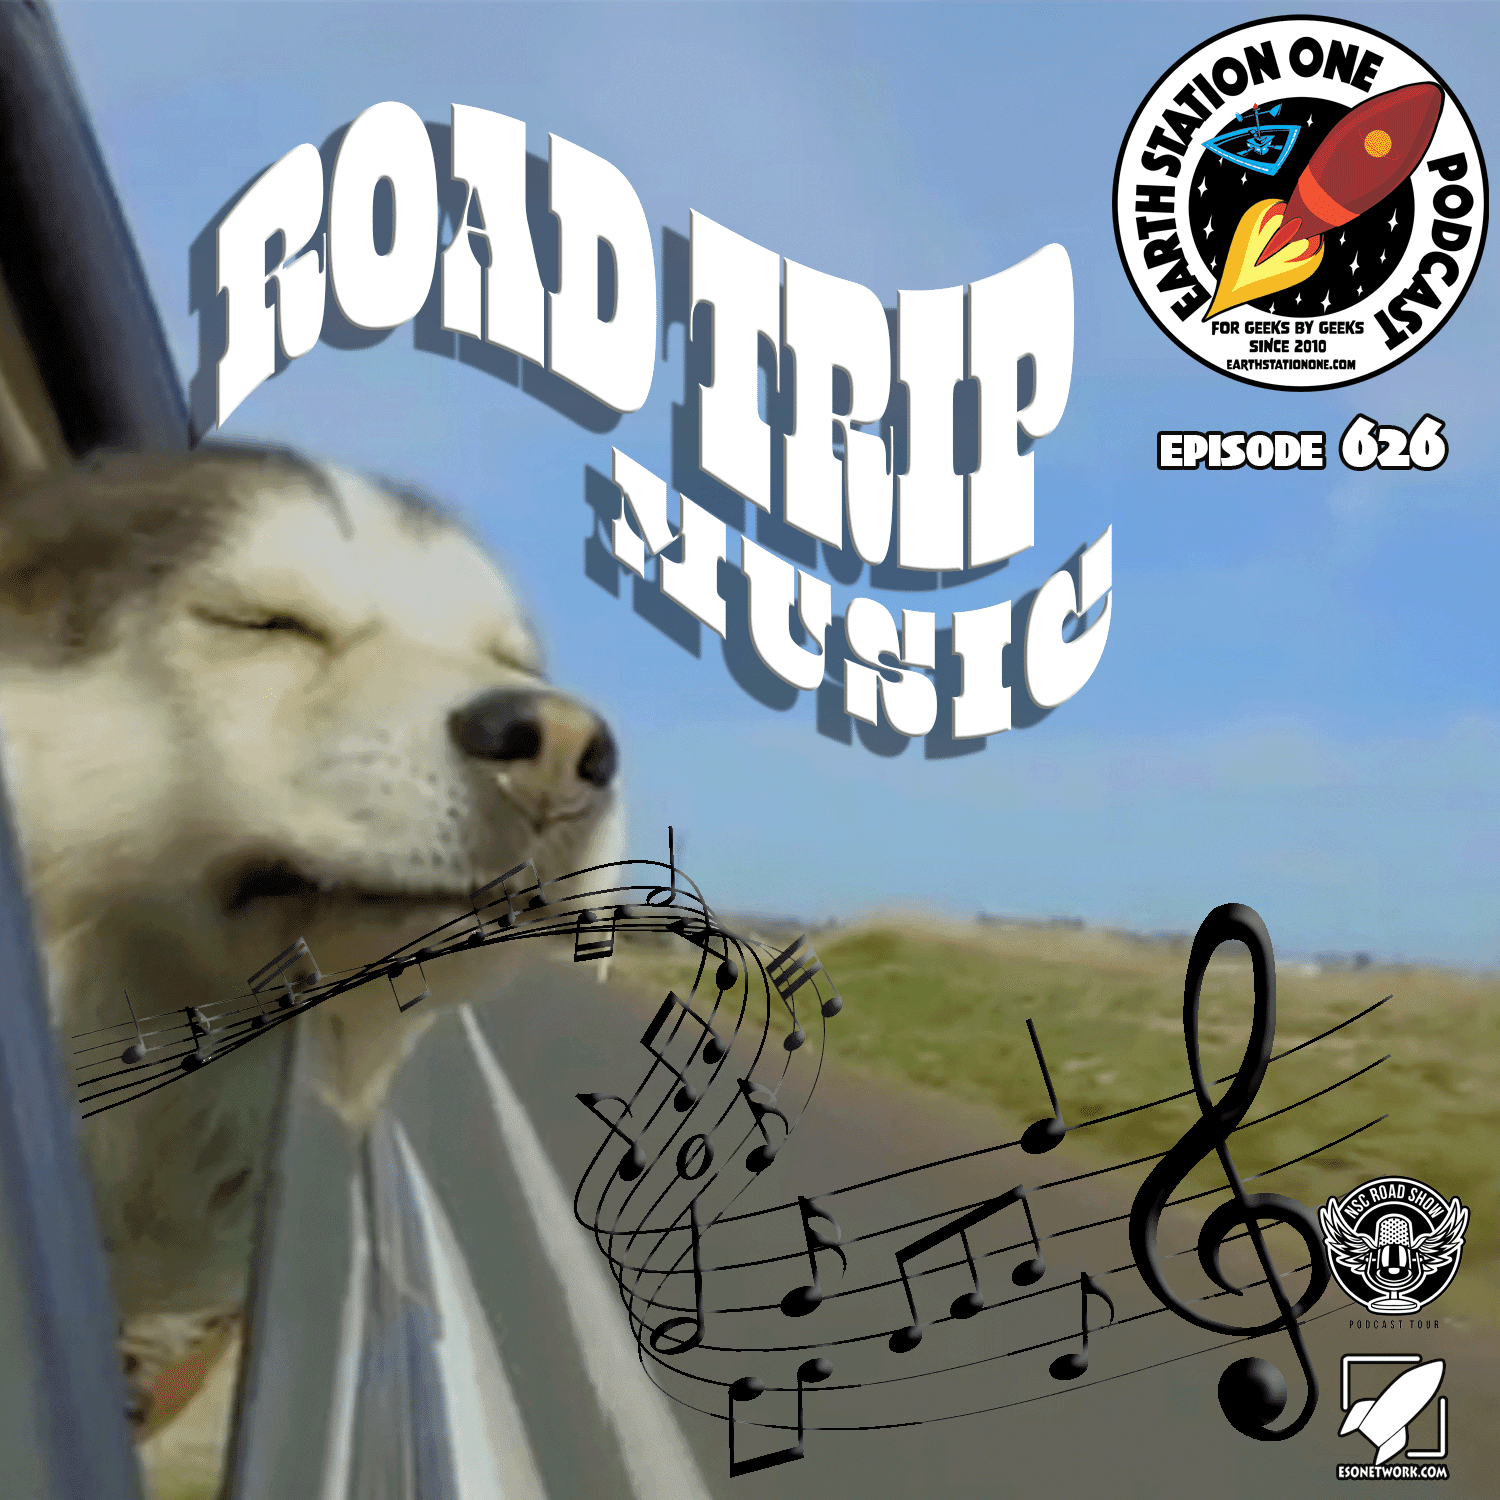 Earth Station One Ep 626 - Road Trip Music